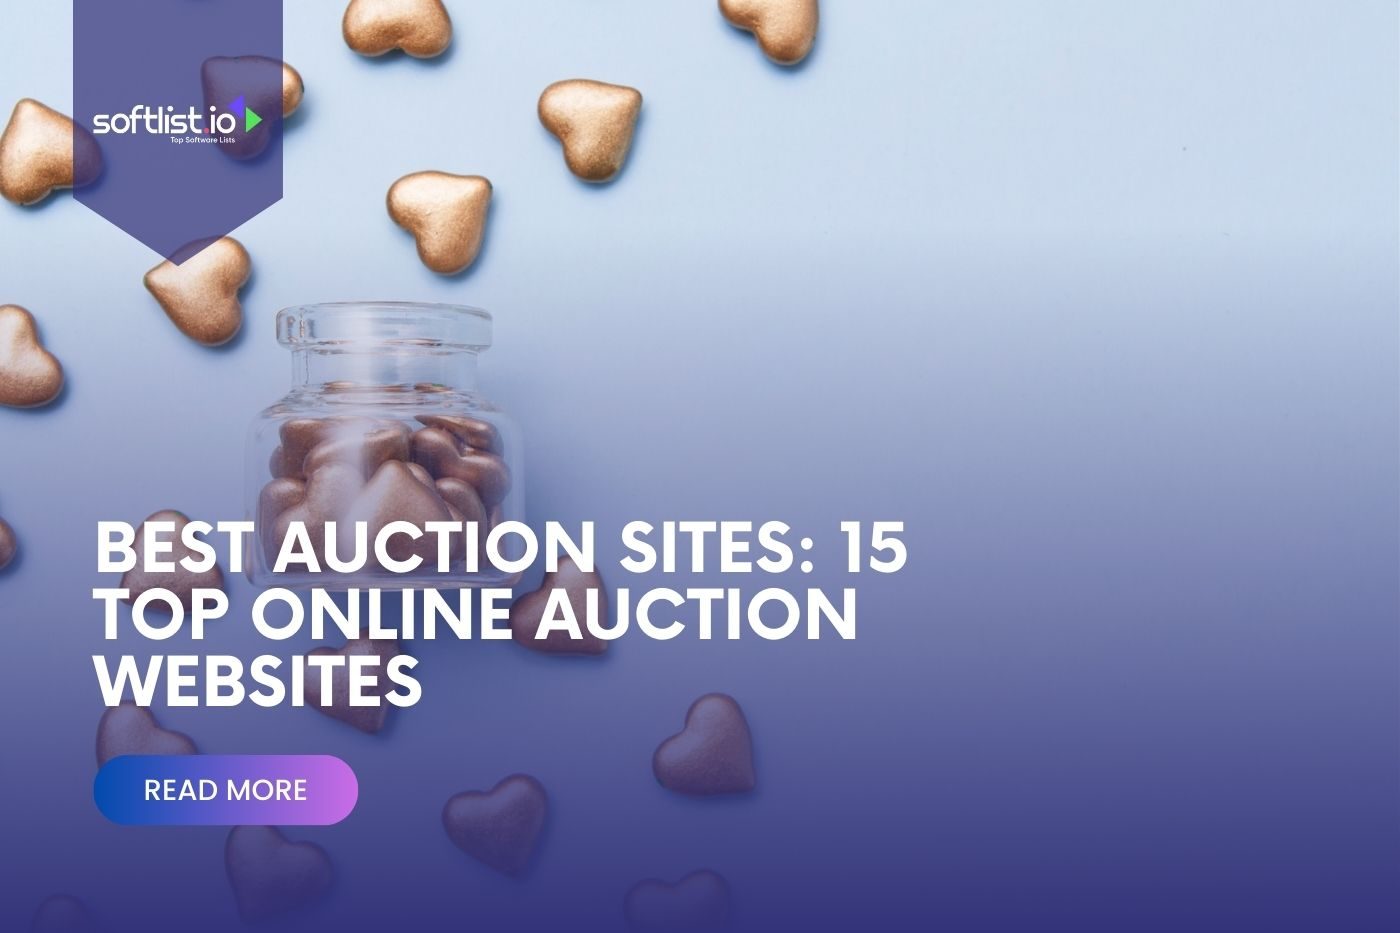 Discover the Best Online Auction Websites